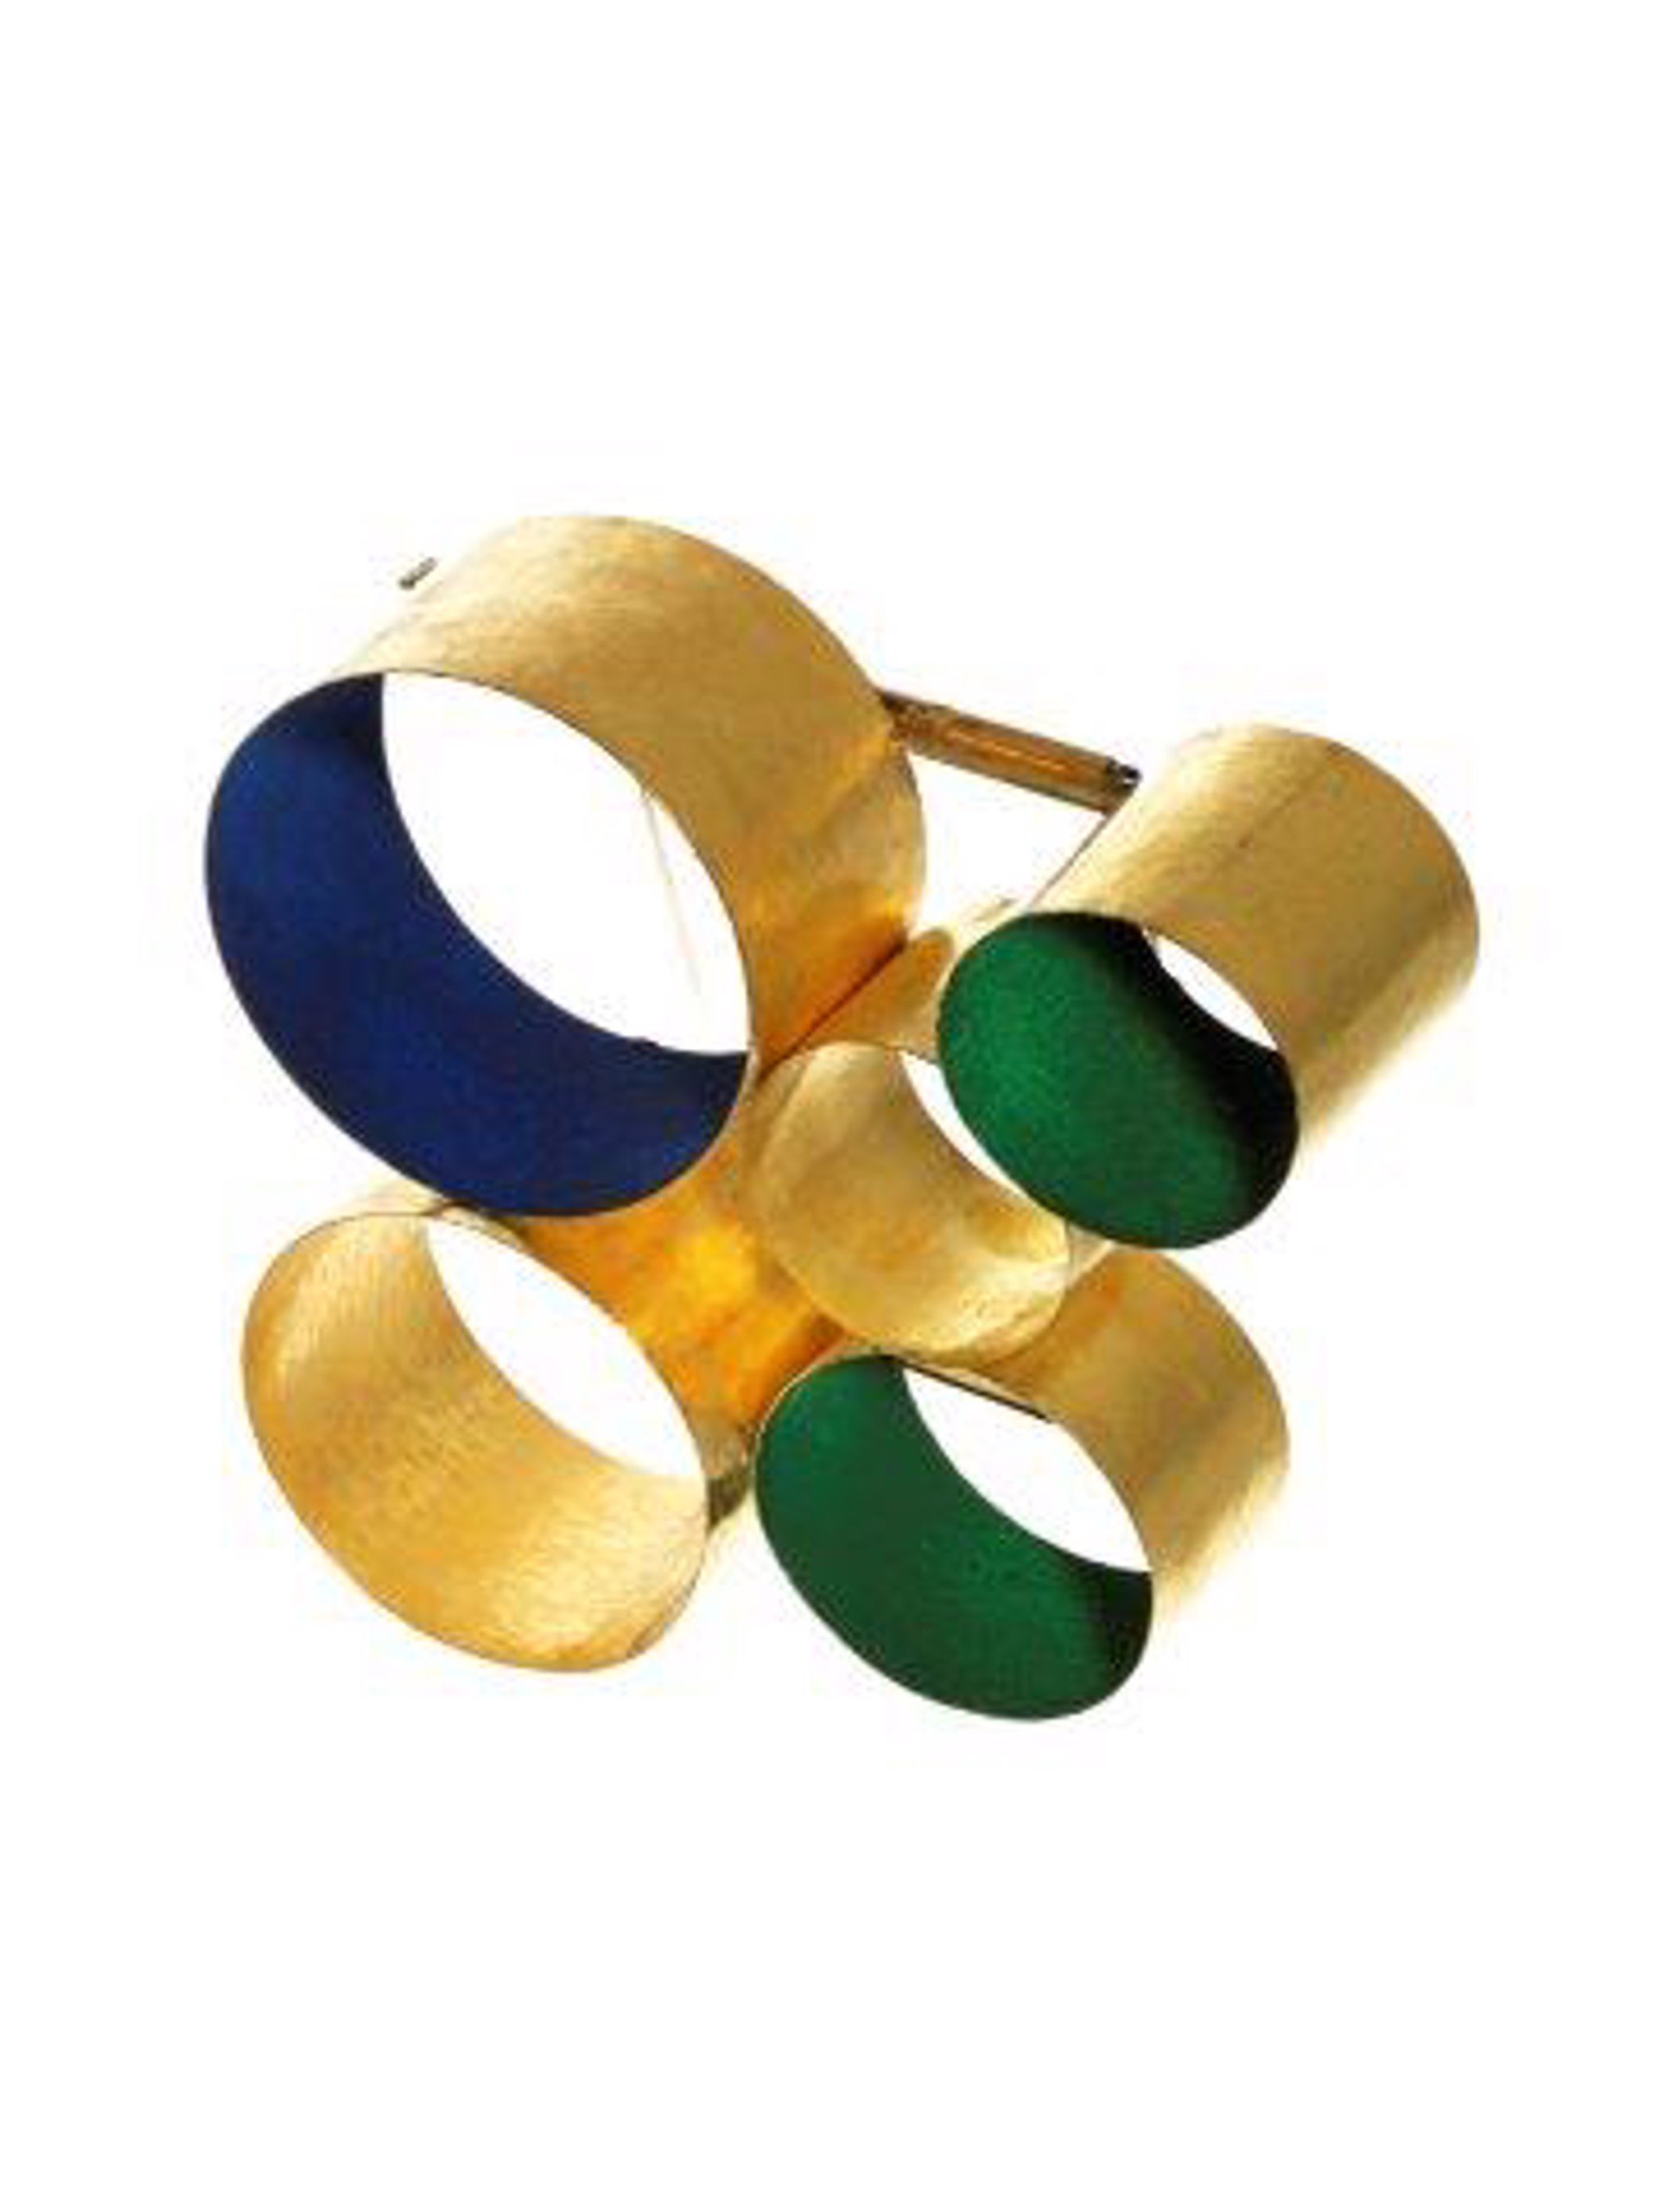 Circles Brooch by Giampaolo Babetto